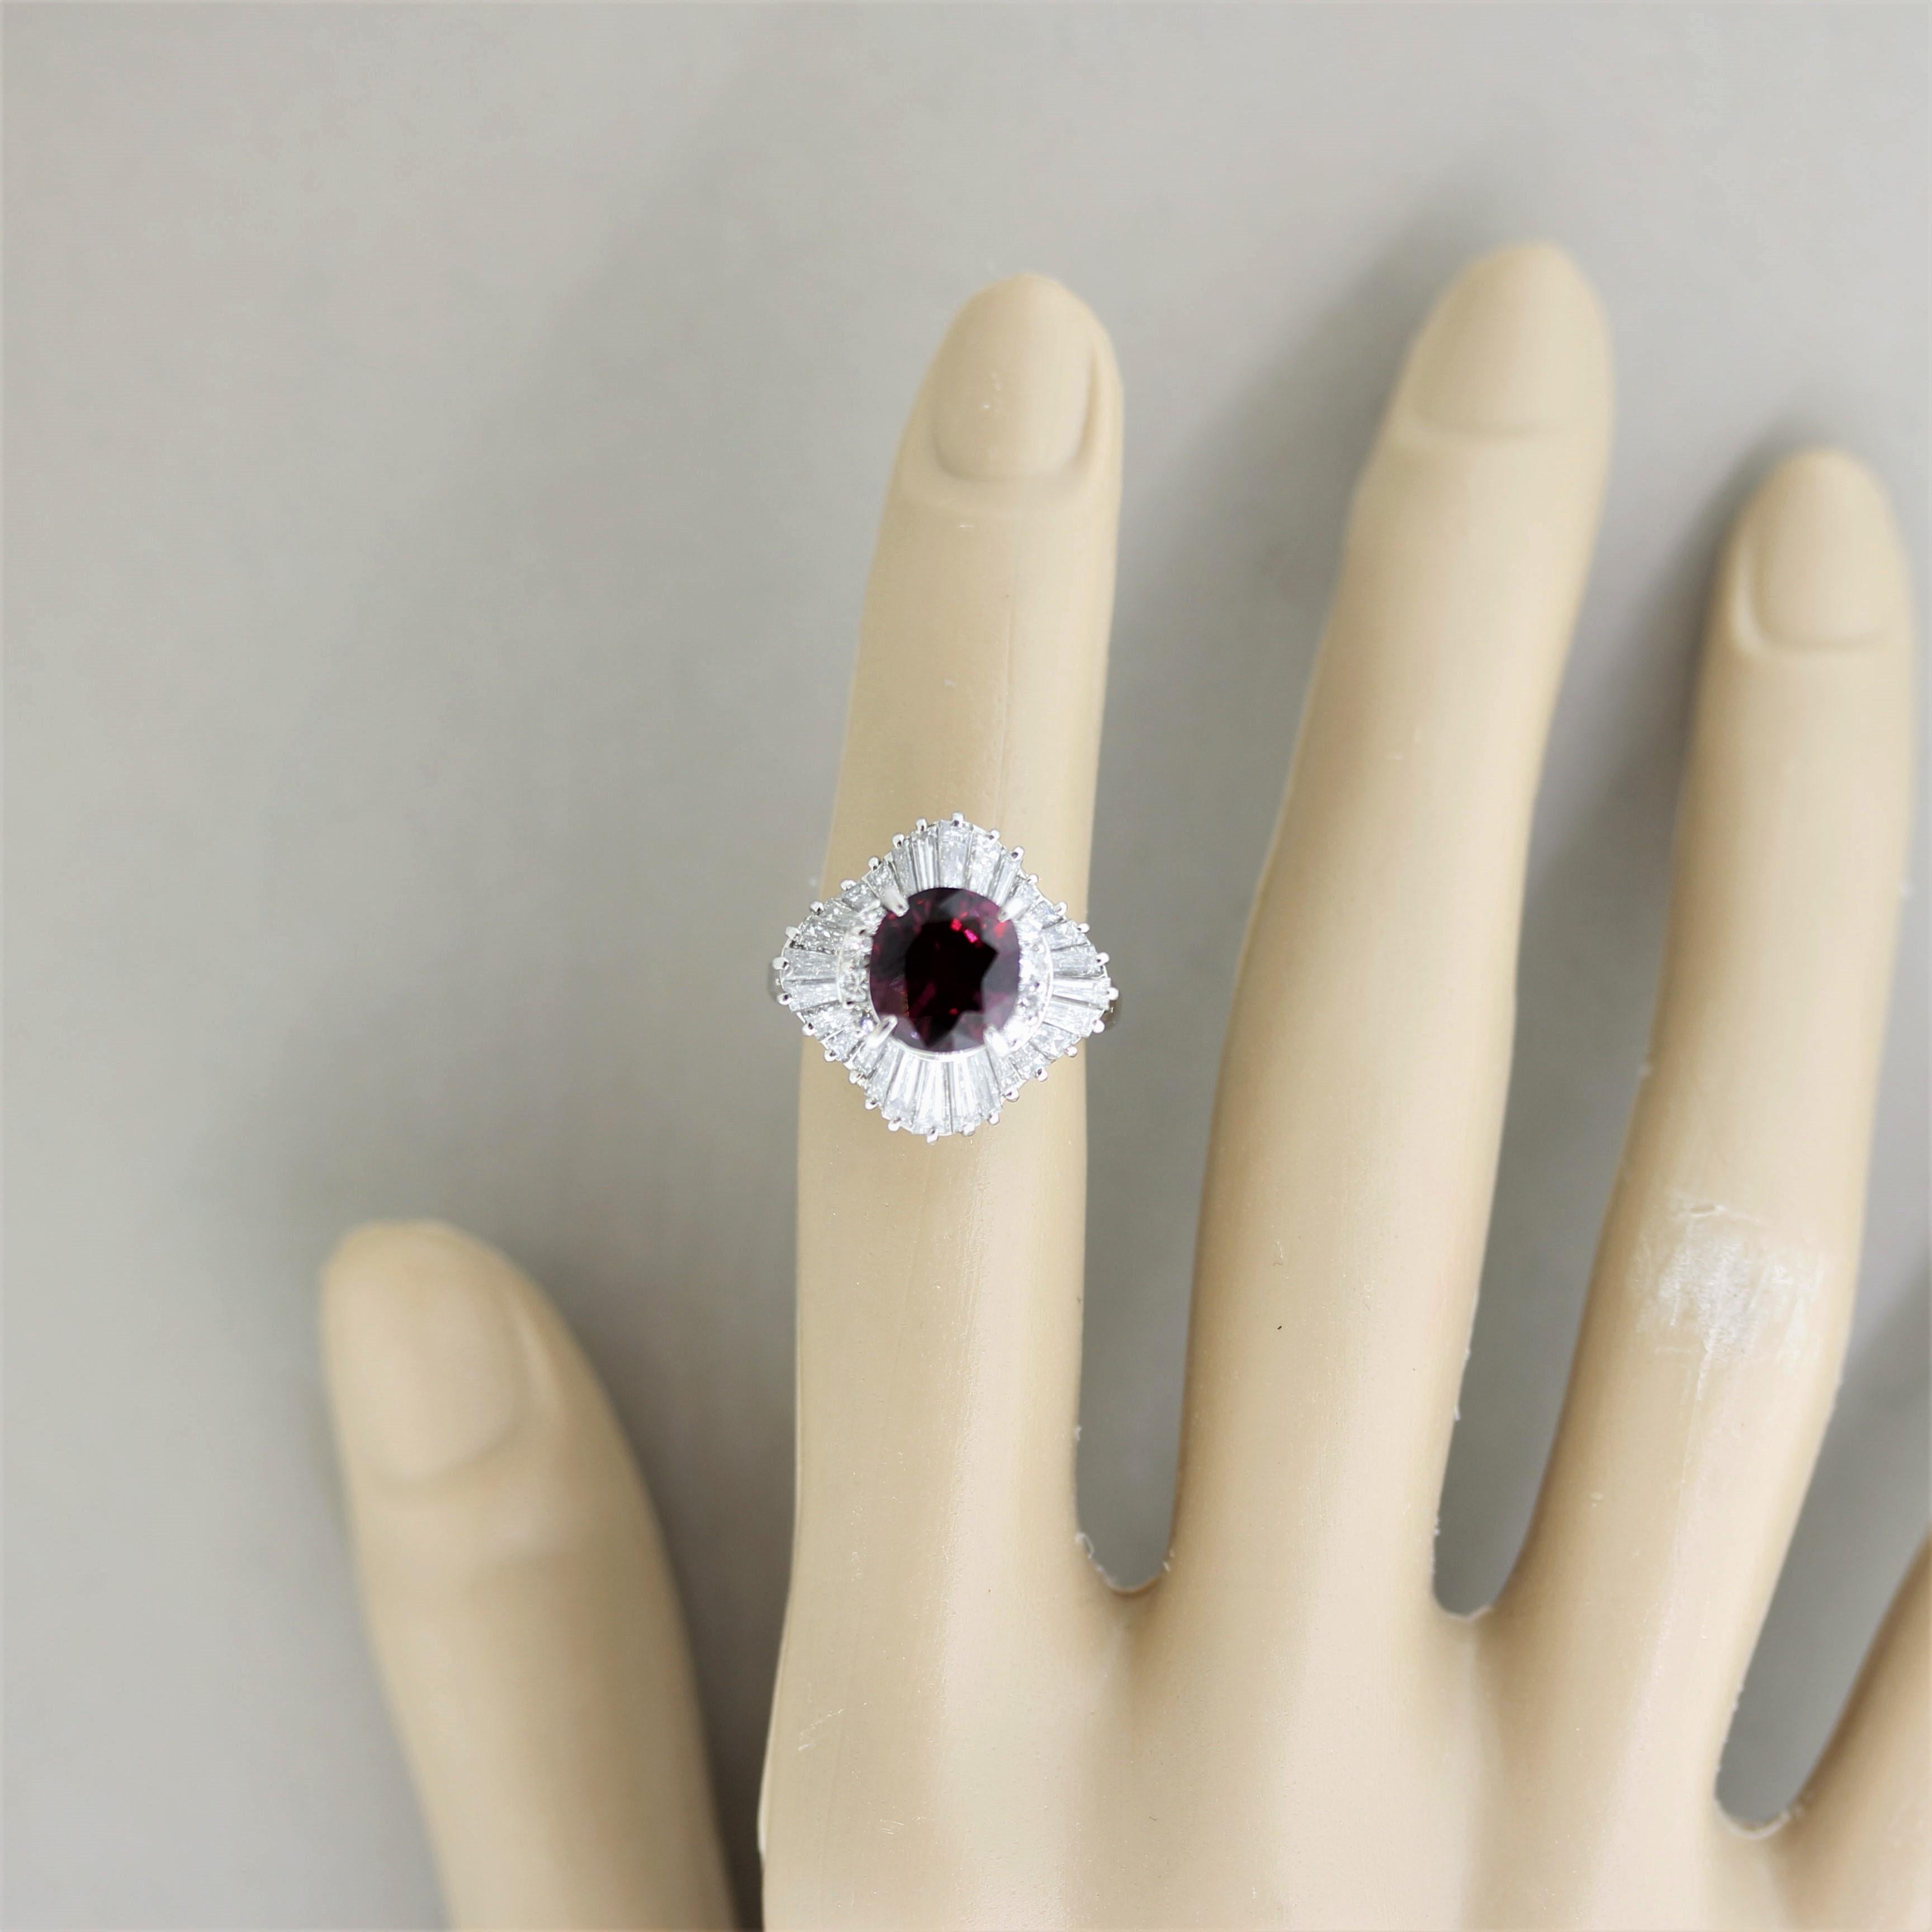 Exceptionally Fine No-Heat Ruby Diamond Platinum Ring, GIA Certified For Sale 2